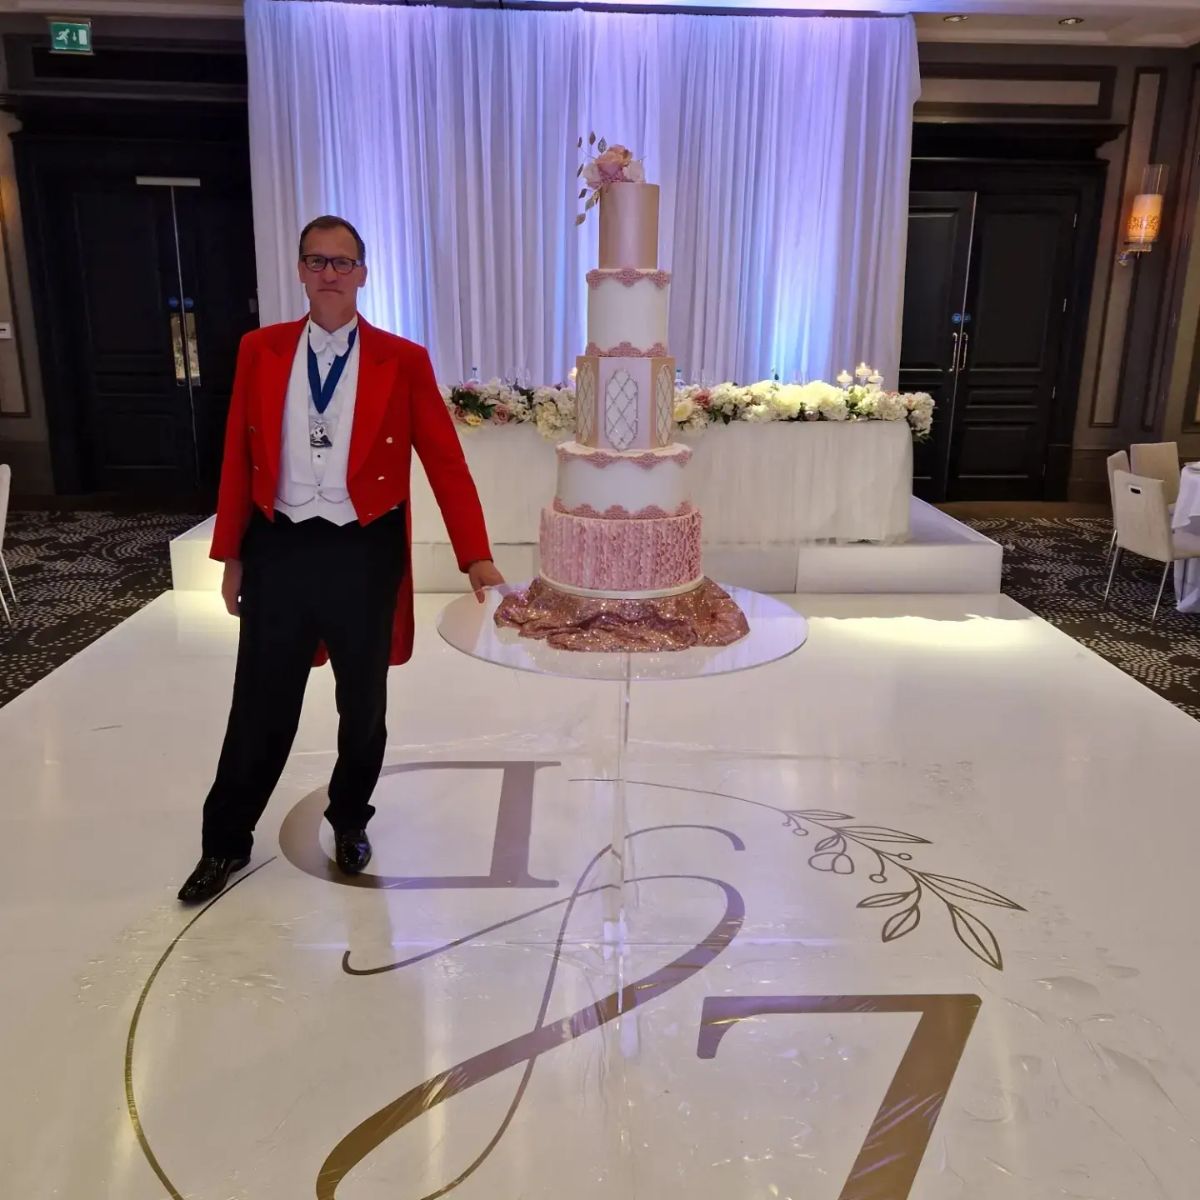 The Man in the Red Coat - Toastmaster James Hasler-Image-28